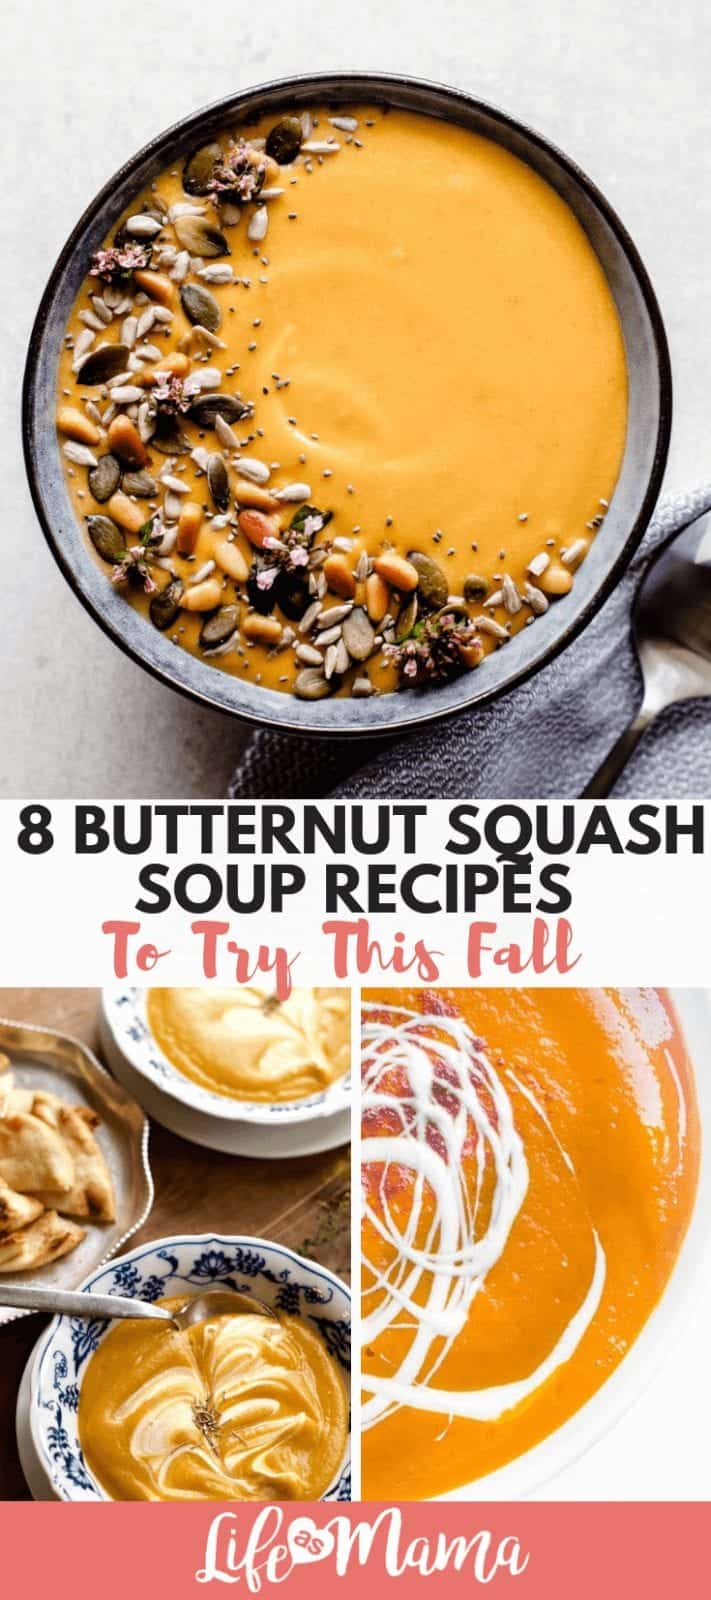 8 Butternut Squash Soup Recipes To Try This Fall